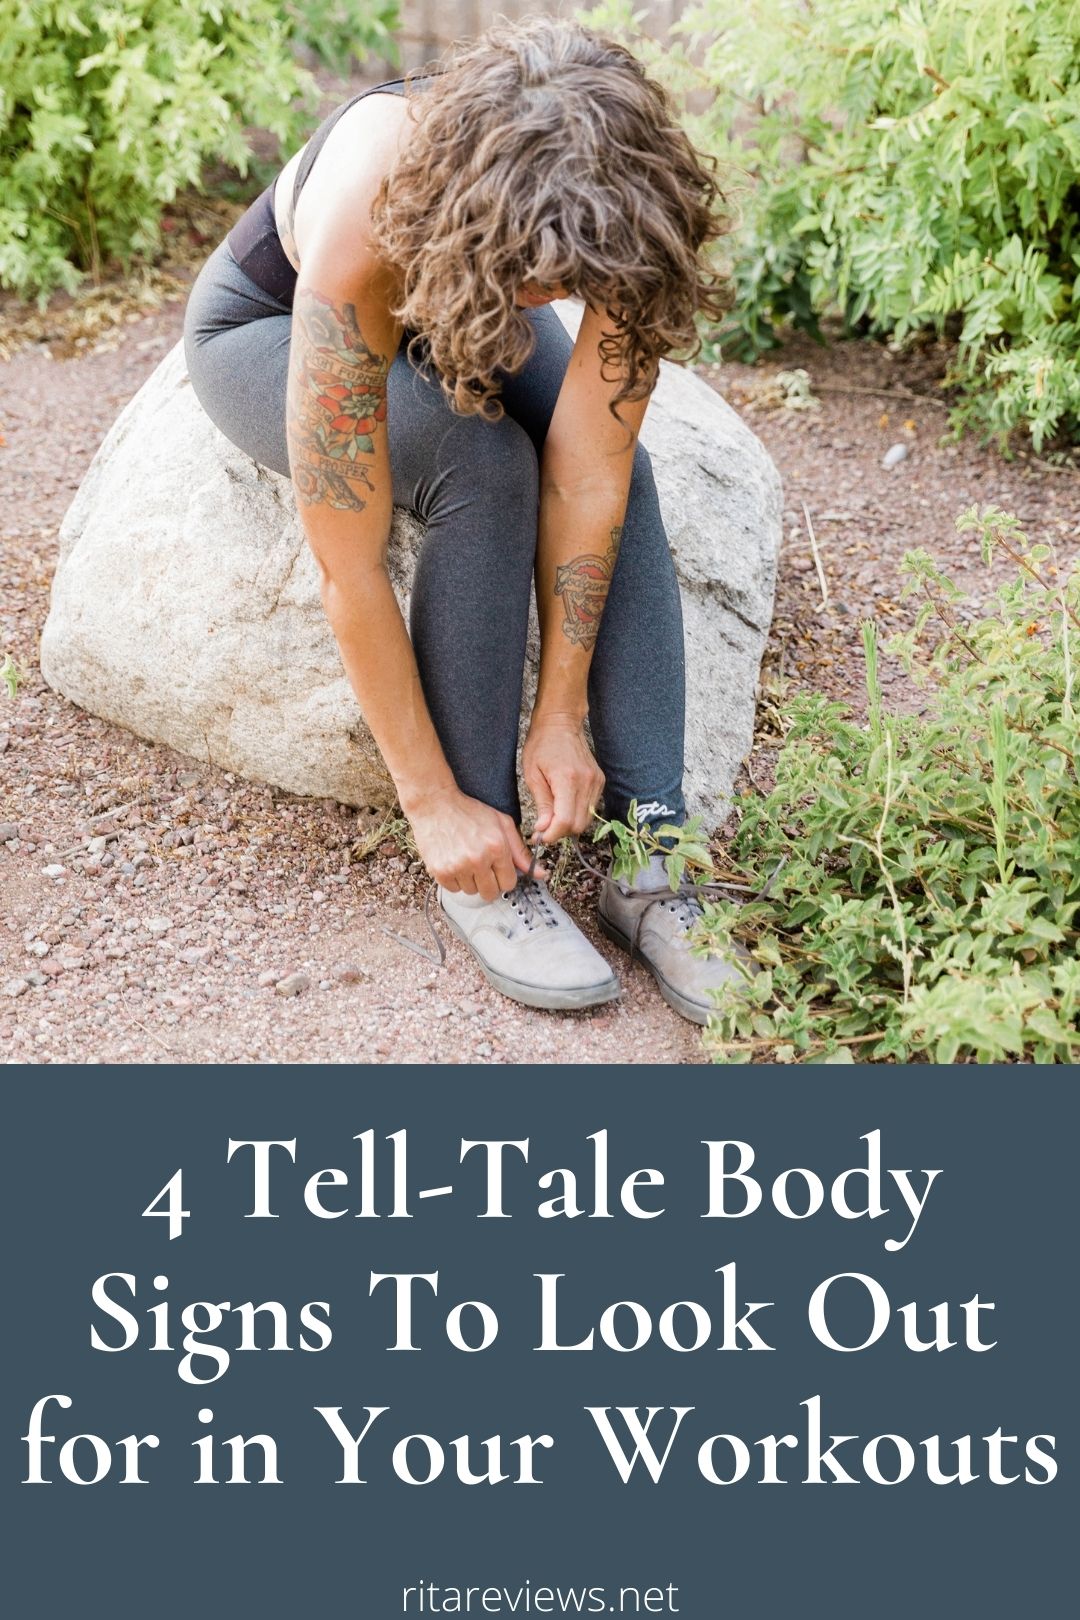 4 Tell-Tale Body Signs To Look Out for in Your Workouts